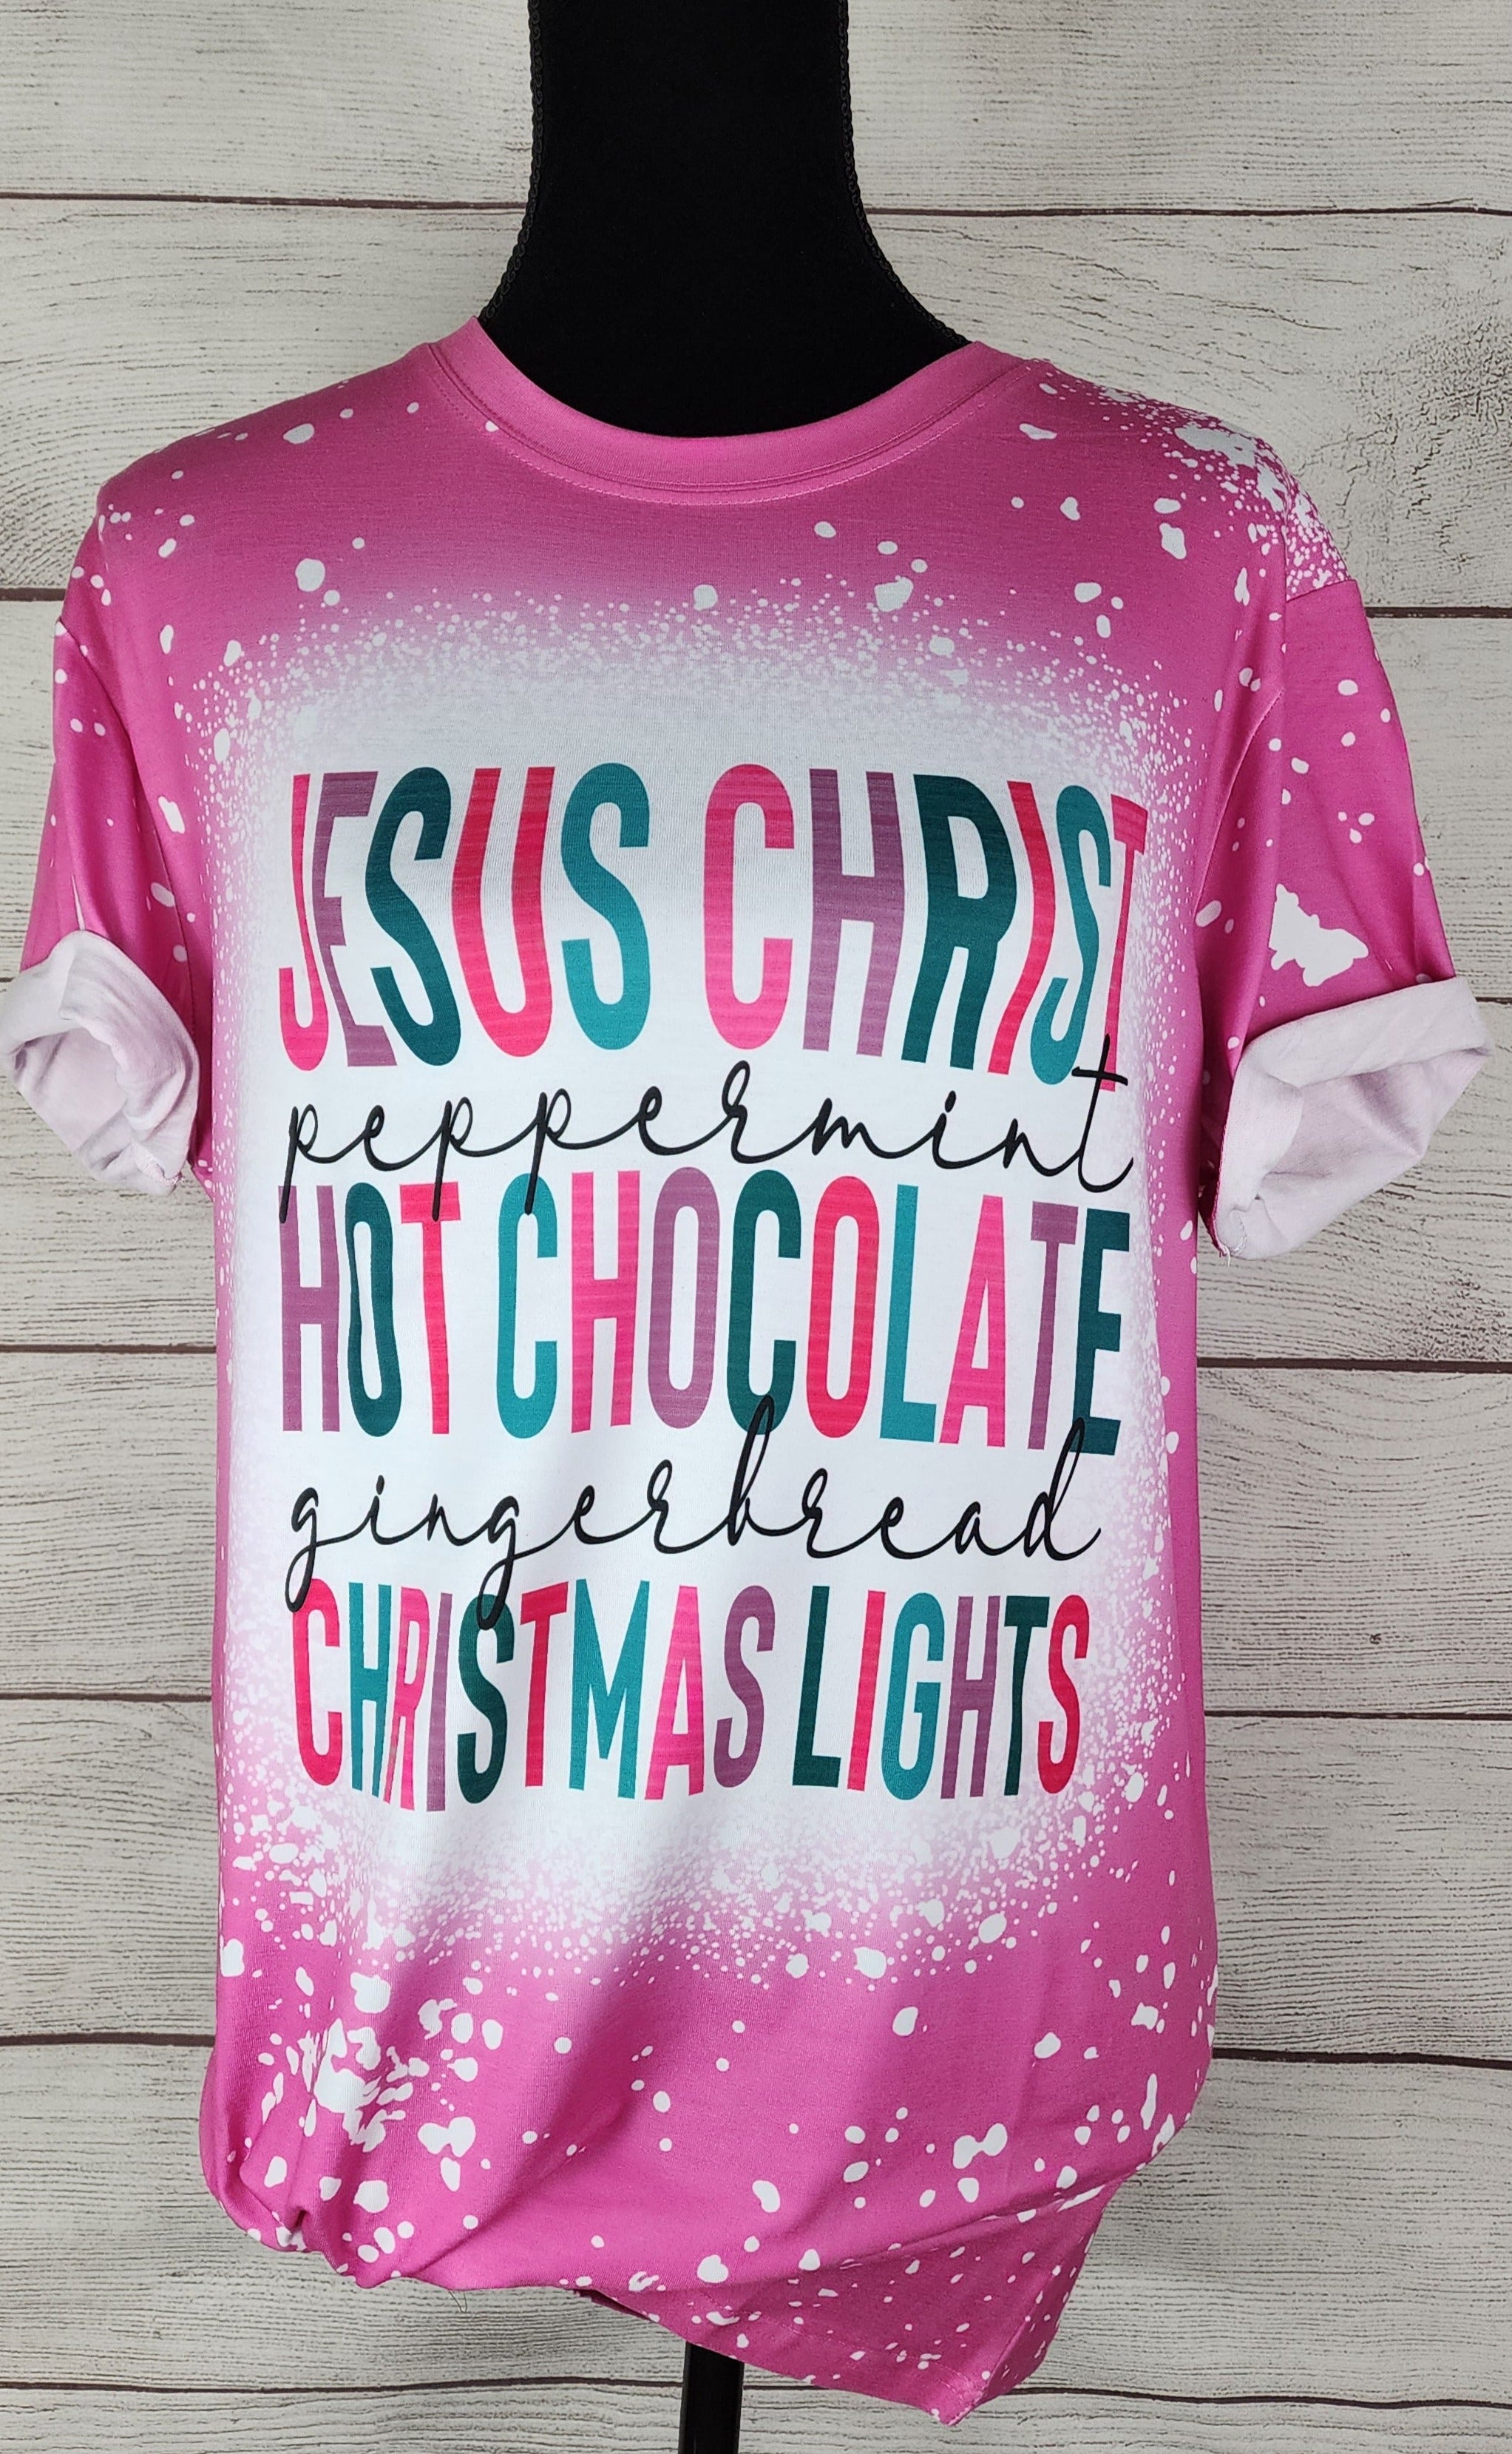 A shirt that says "Jesus Christ, Peppermint, Hot Chocolate, Gingerbread, Christmas  Lights